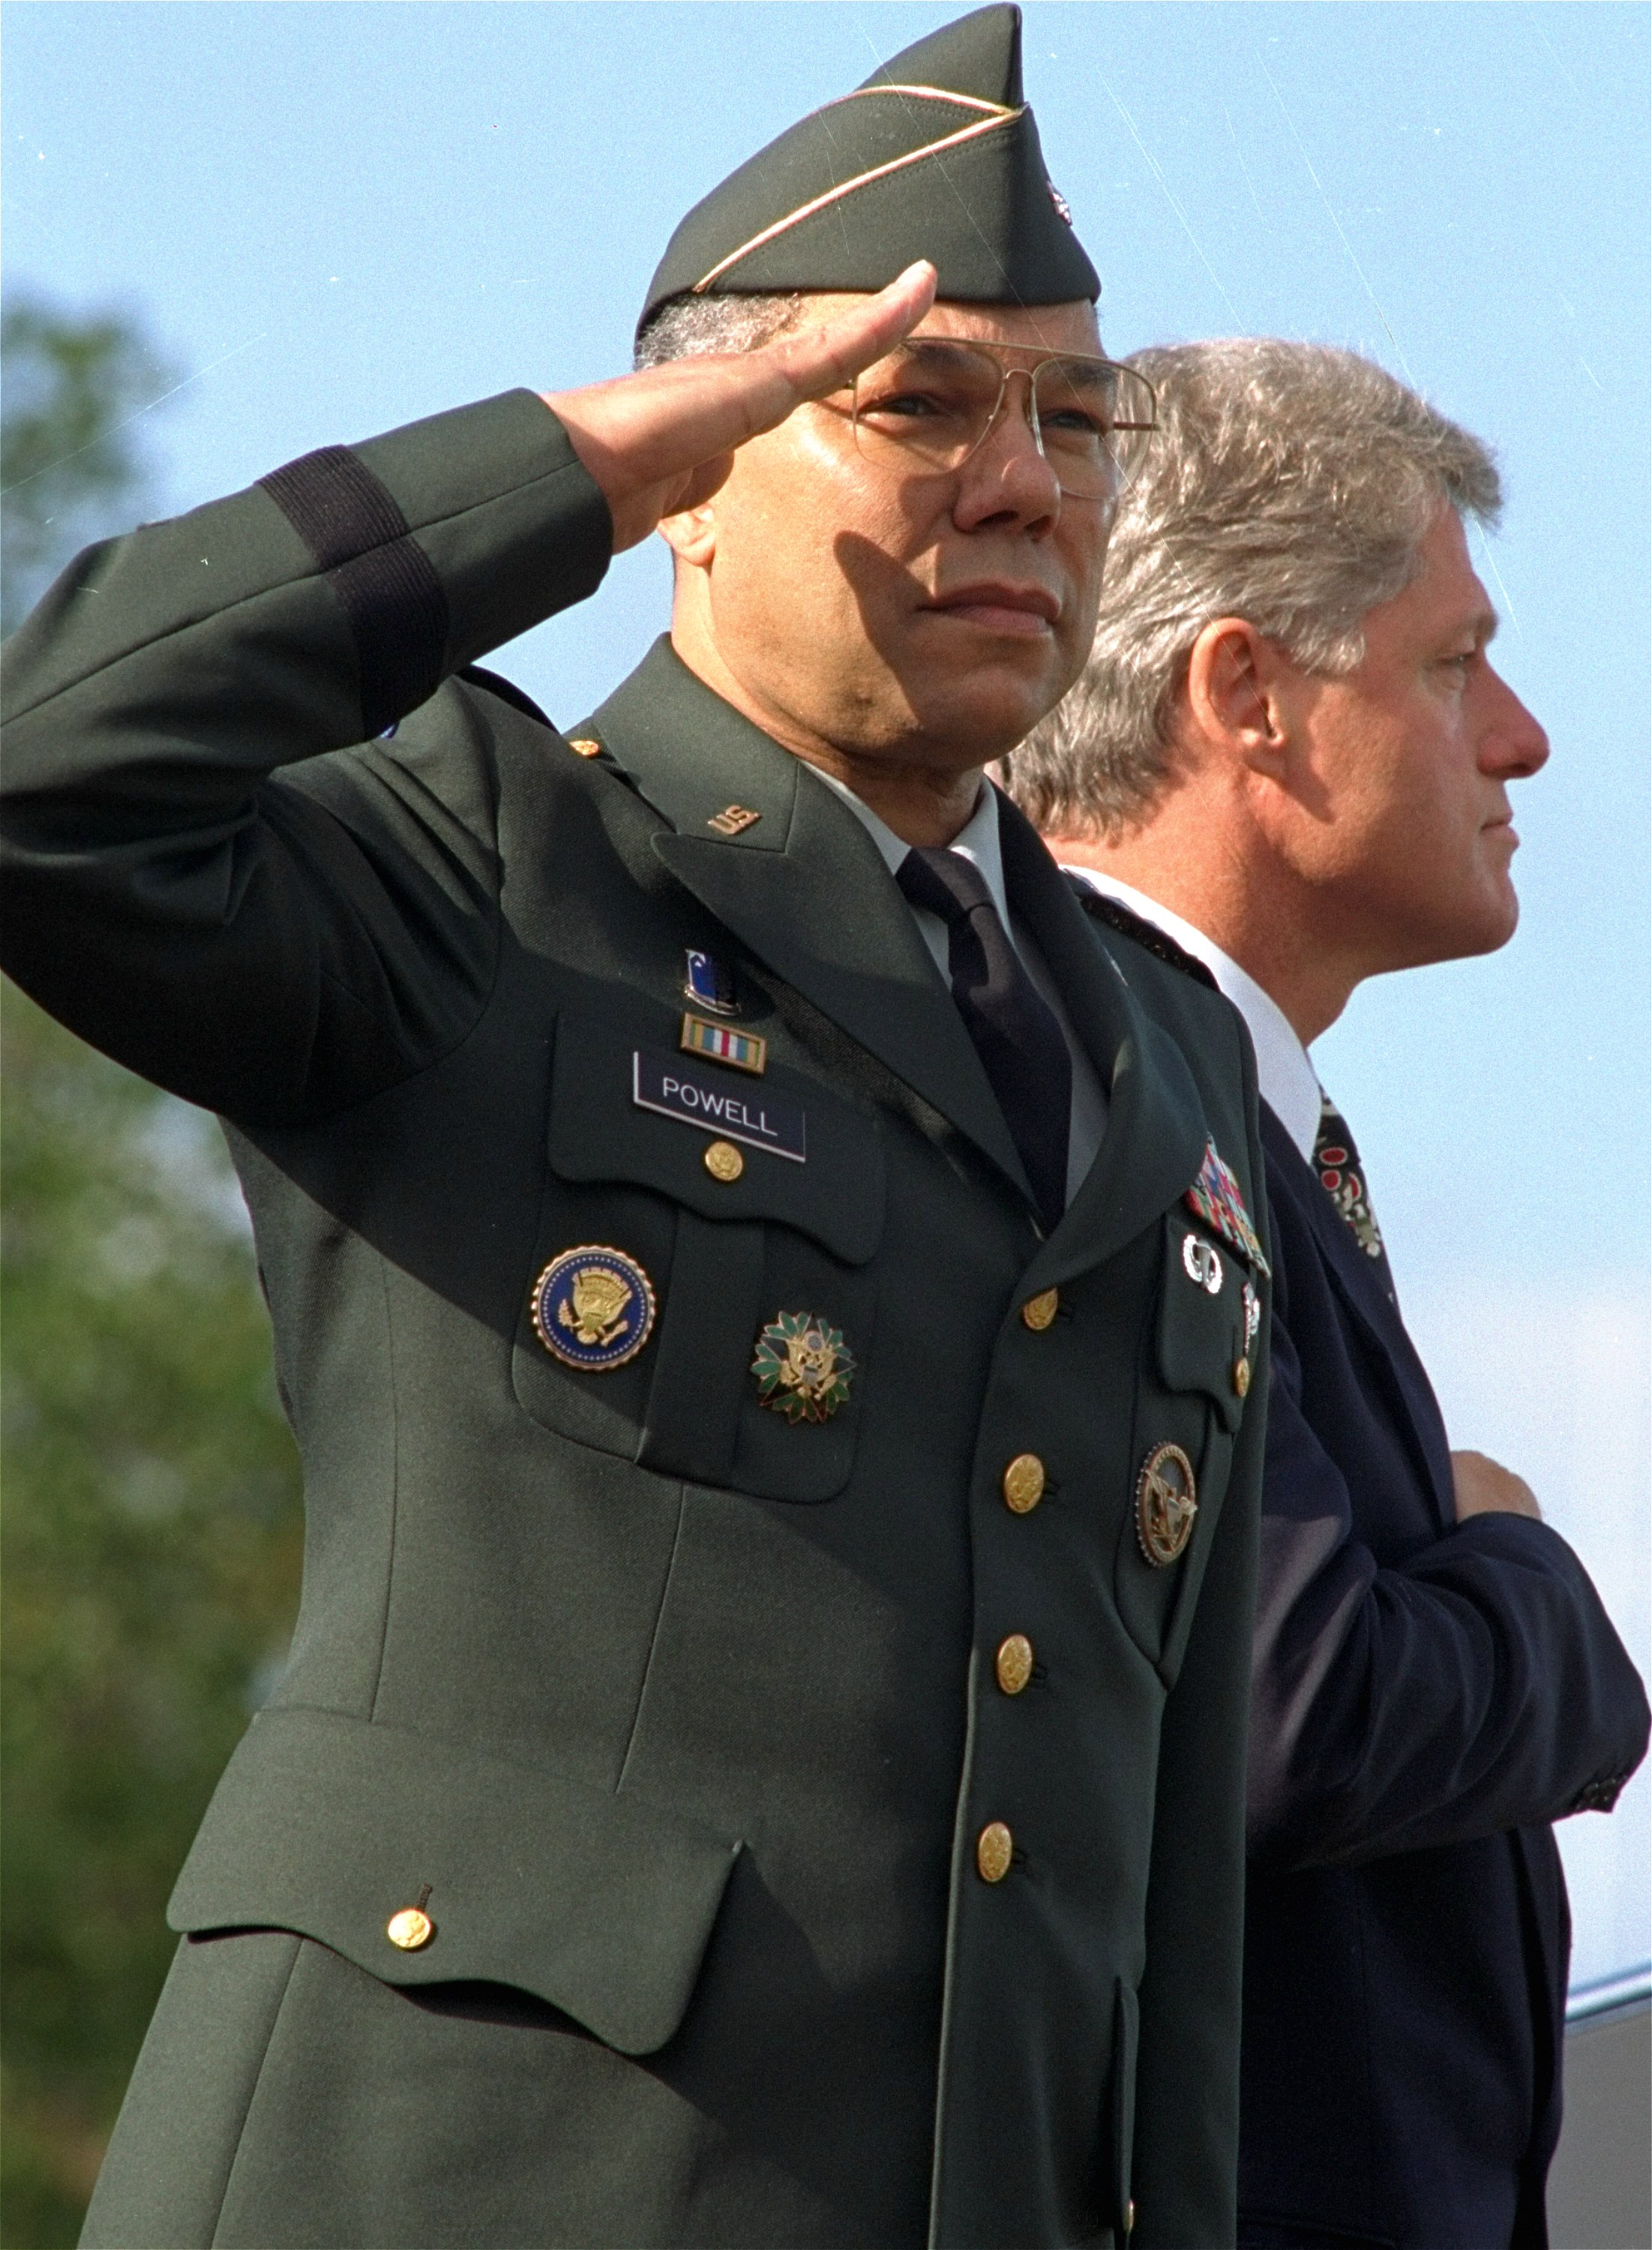 Colin Powell’s retirement in 1993